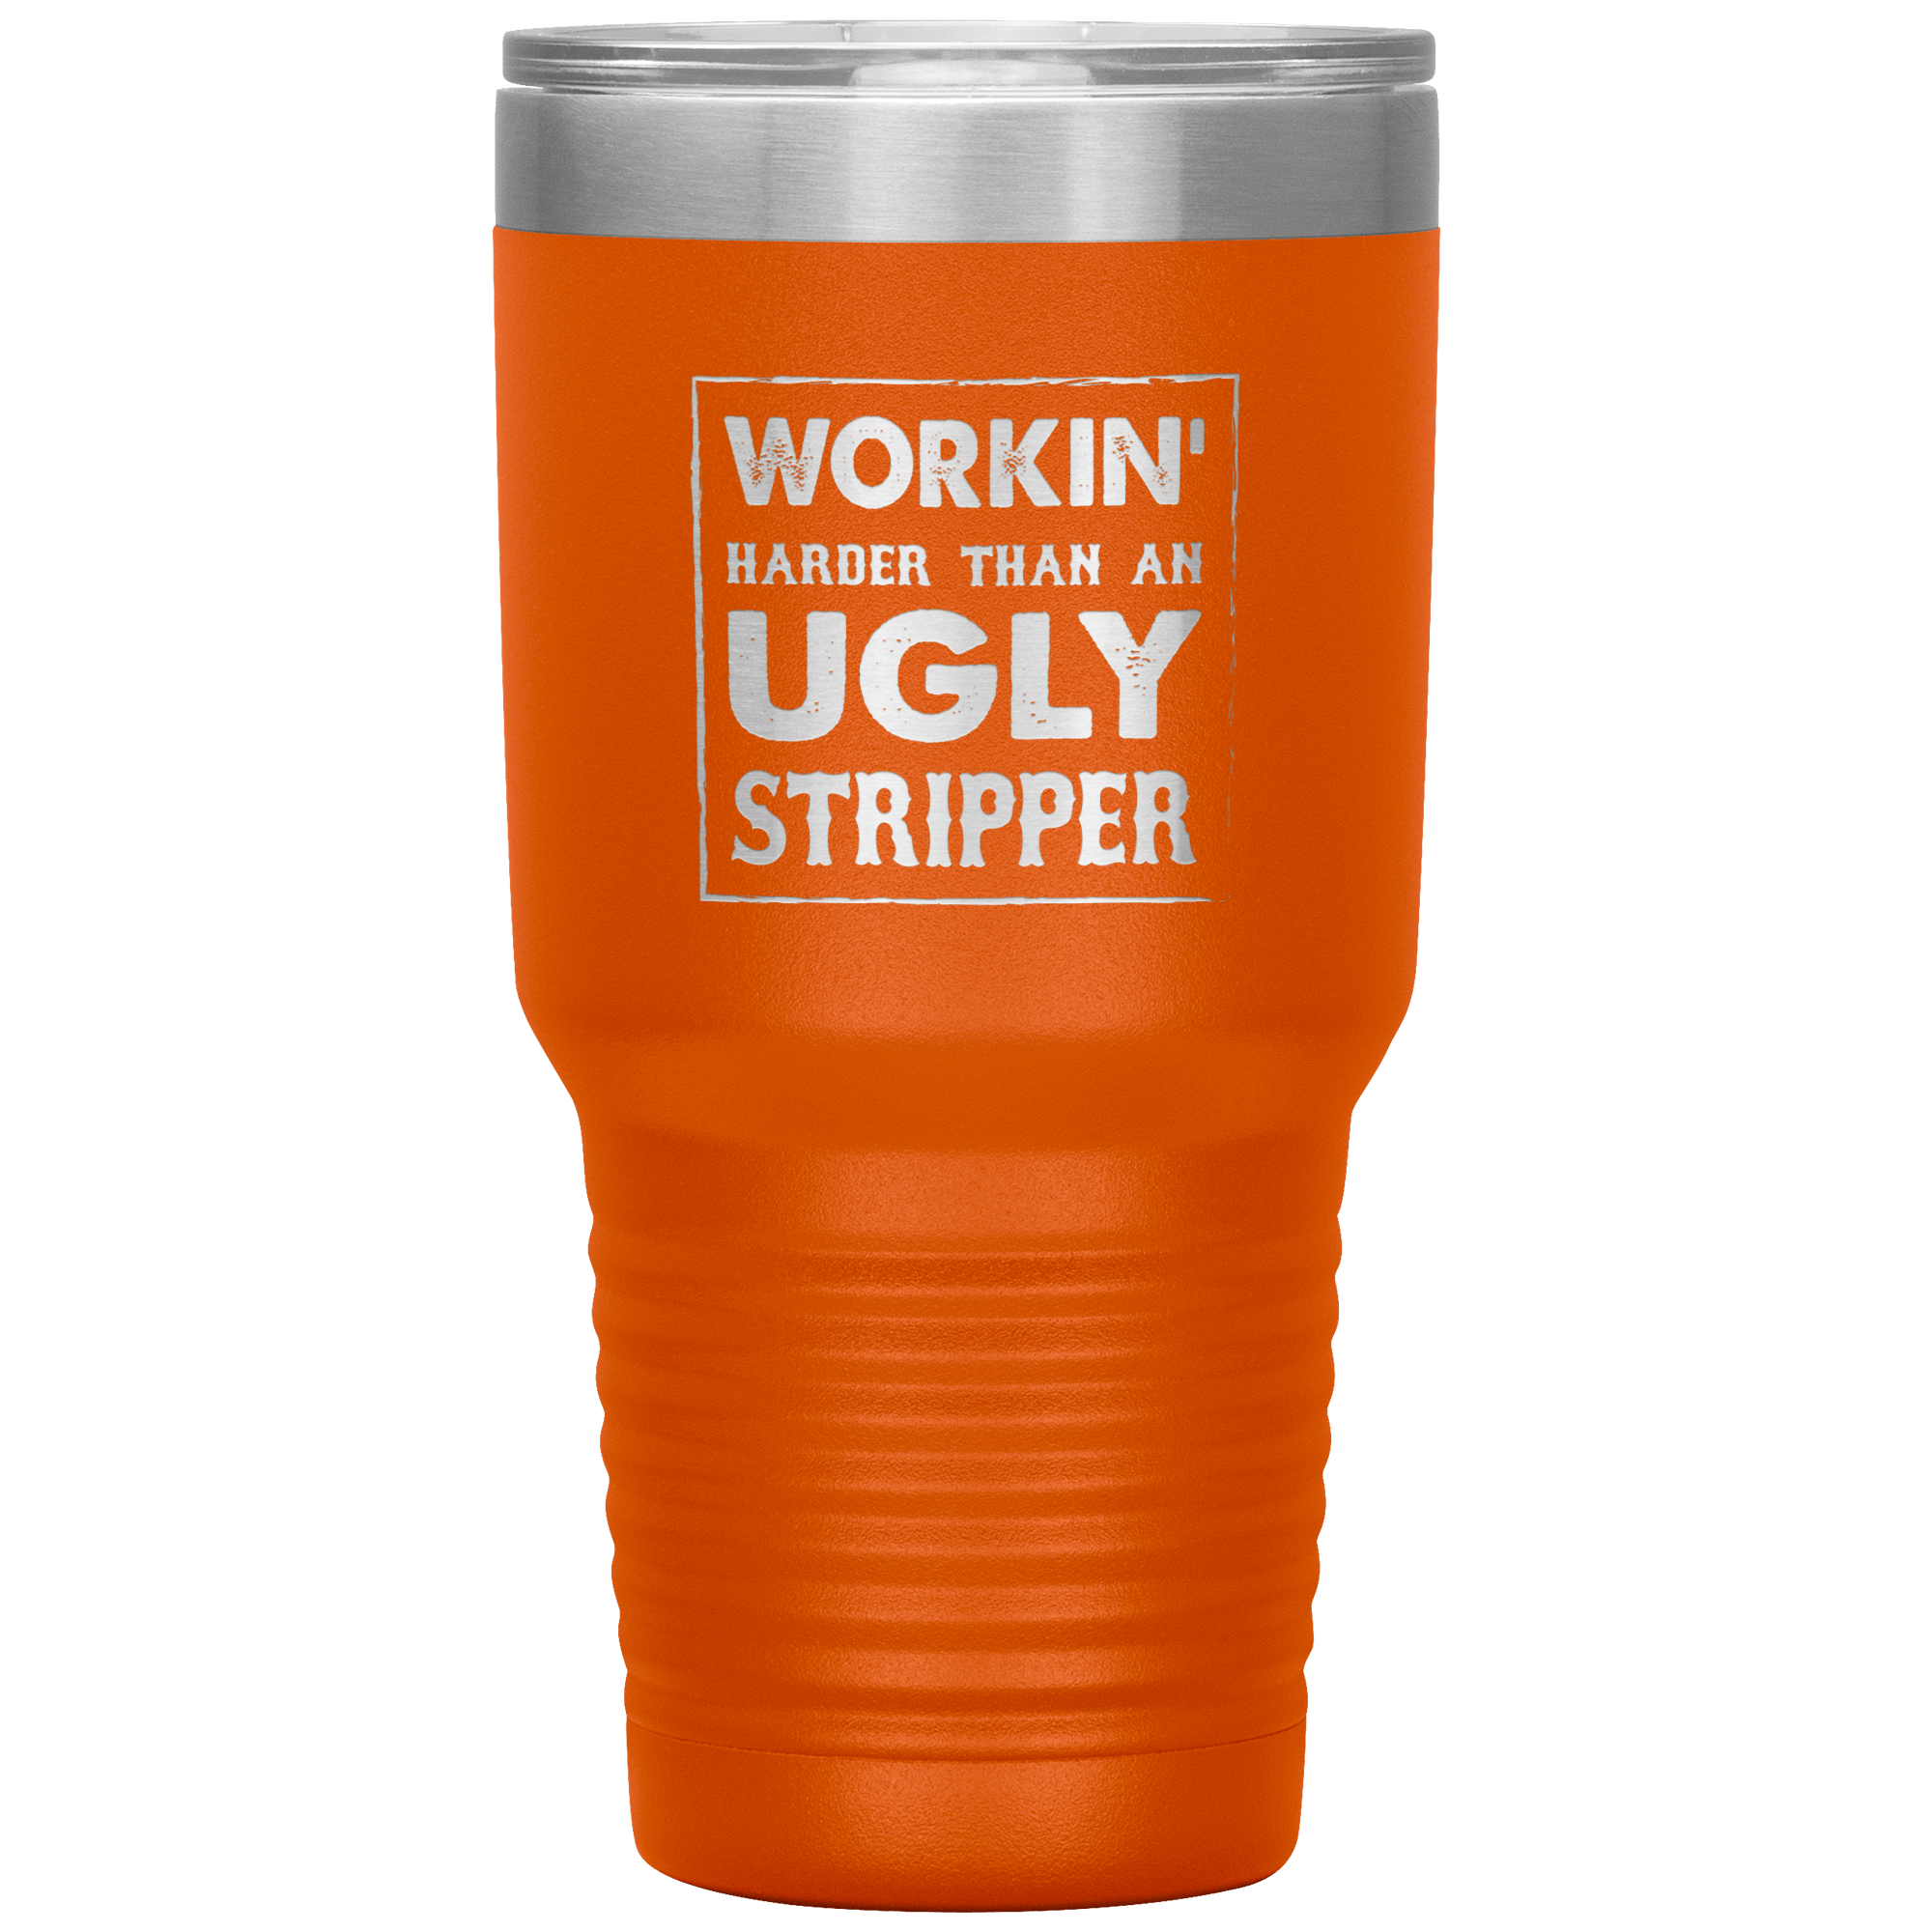 " WORKING HARDER THAN AN UGLY STRIPPER " TUMBLER